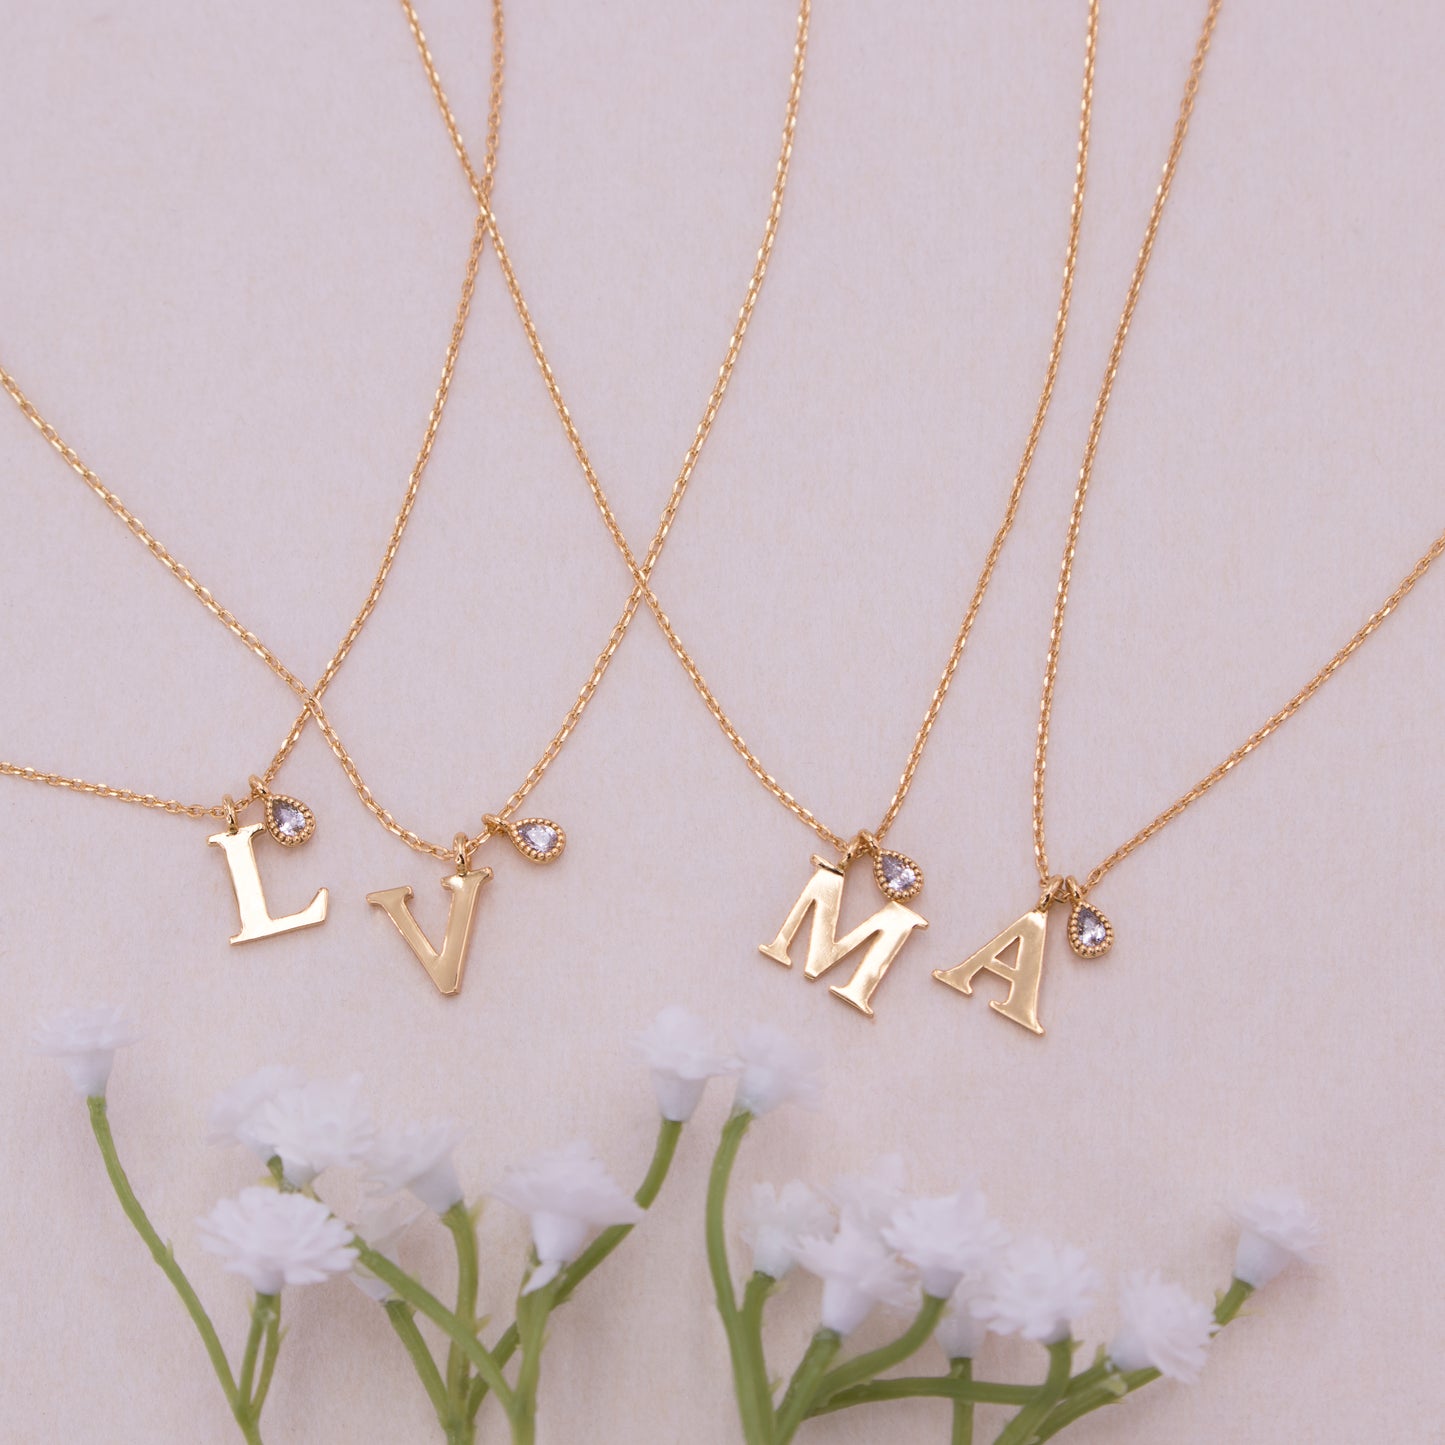 Personalized Initial Charm Necklace